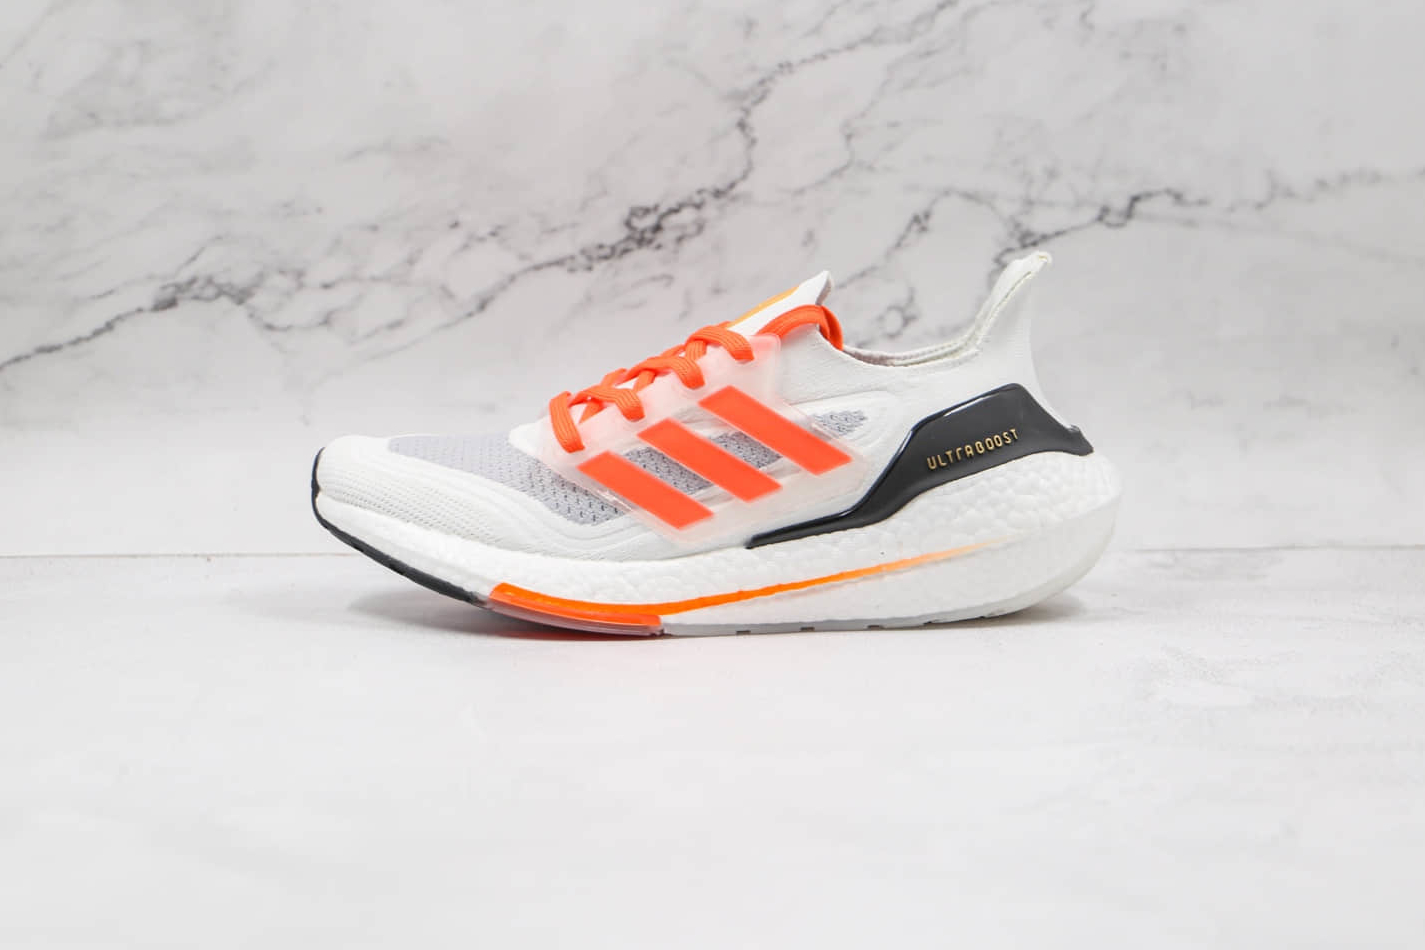 Adidas UltraBoost 21 'Grey Screaming Orange' FY0375 - Stylish and Comfortable Sneakers